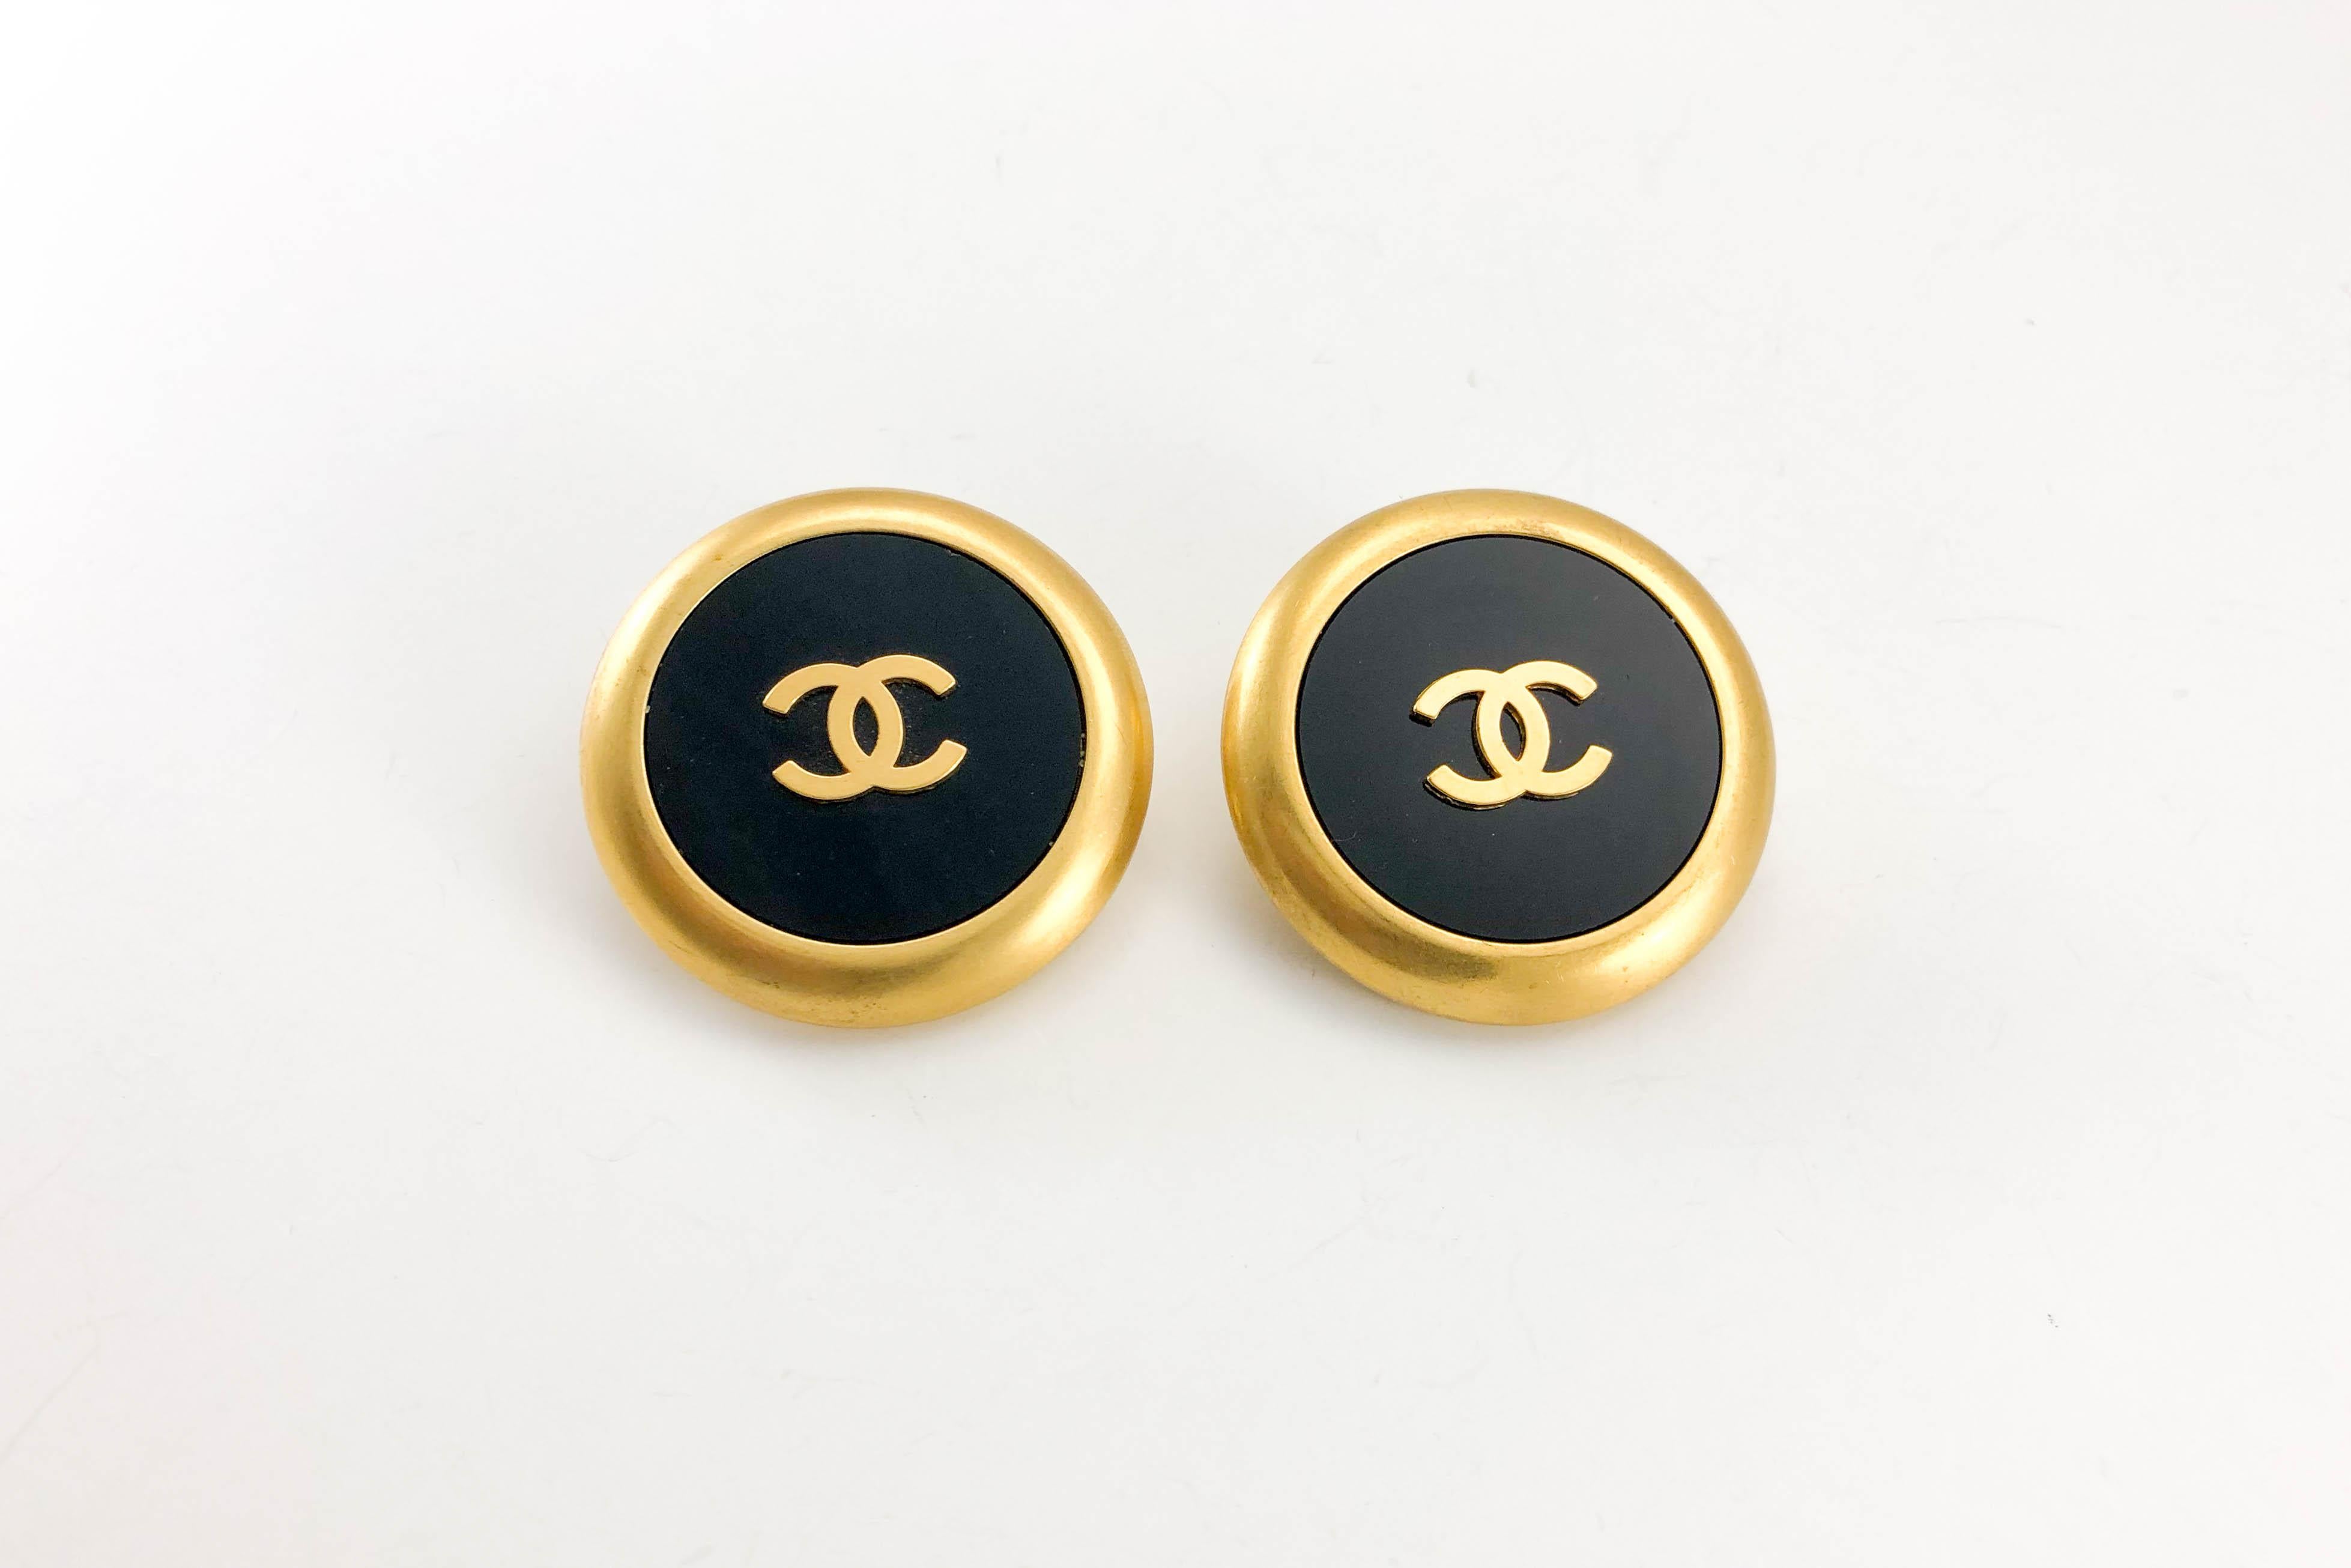 Vintage Chanel Large Black and Gold Logo Clip-on Earrings. These fabulous earrings by Chanel date back from 1992. Made in gilt metal and black resin, these large round earrings feature the iconic ‘CC’ logo in the centre. Chanel signed on the back. A